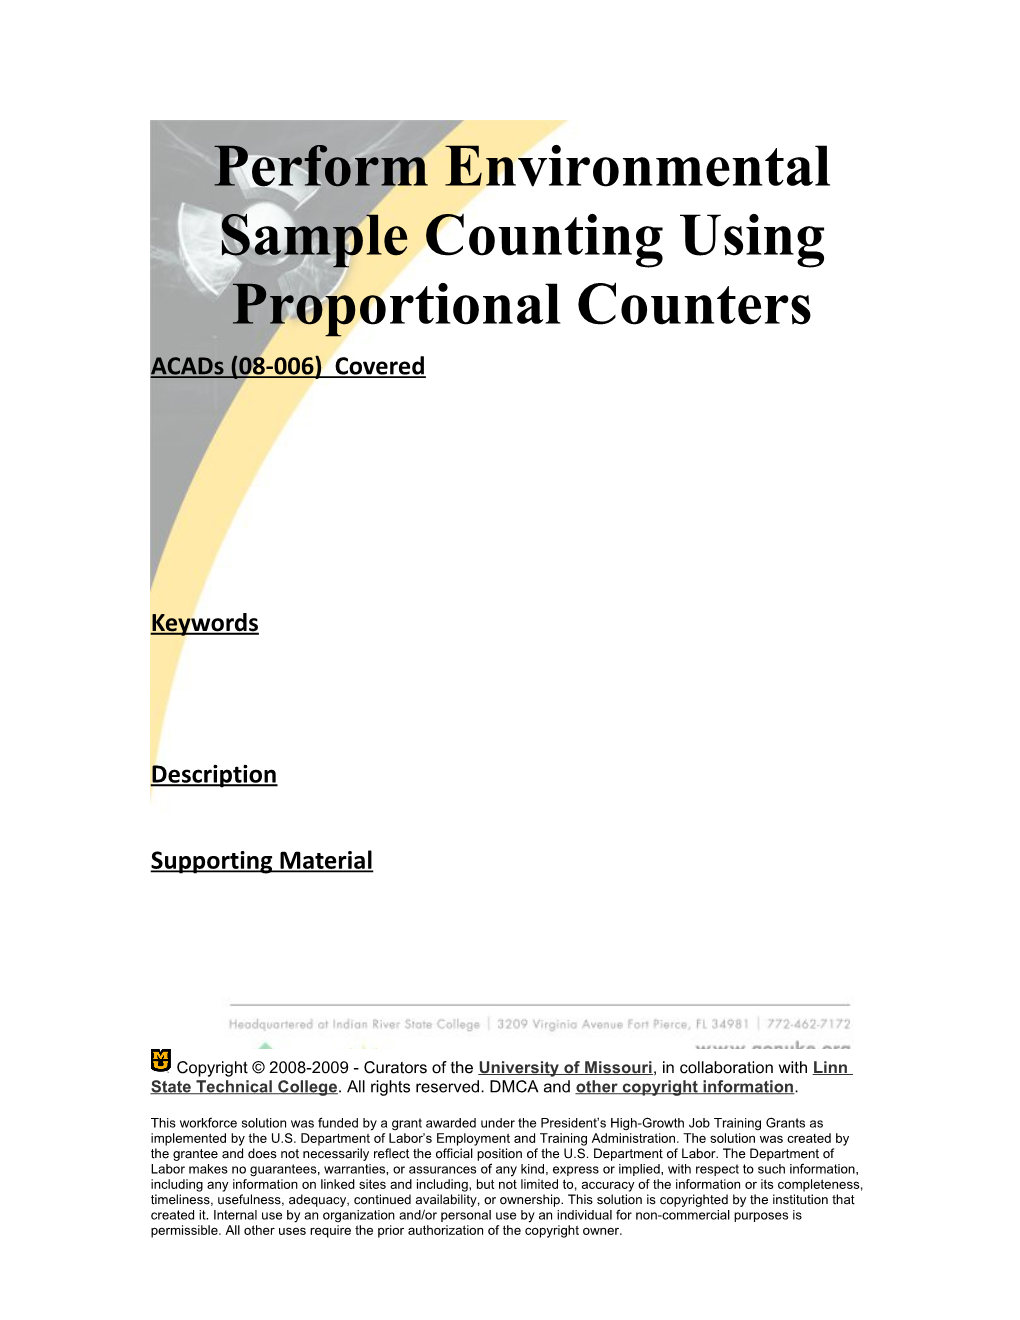 Module 6: Perform Environmental Sample Counting Using Proportional Counters